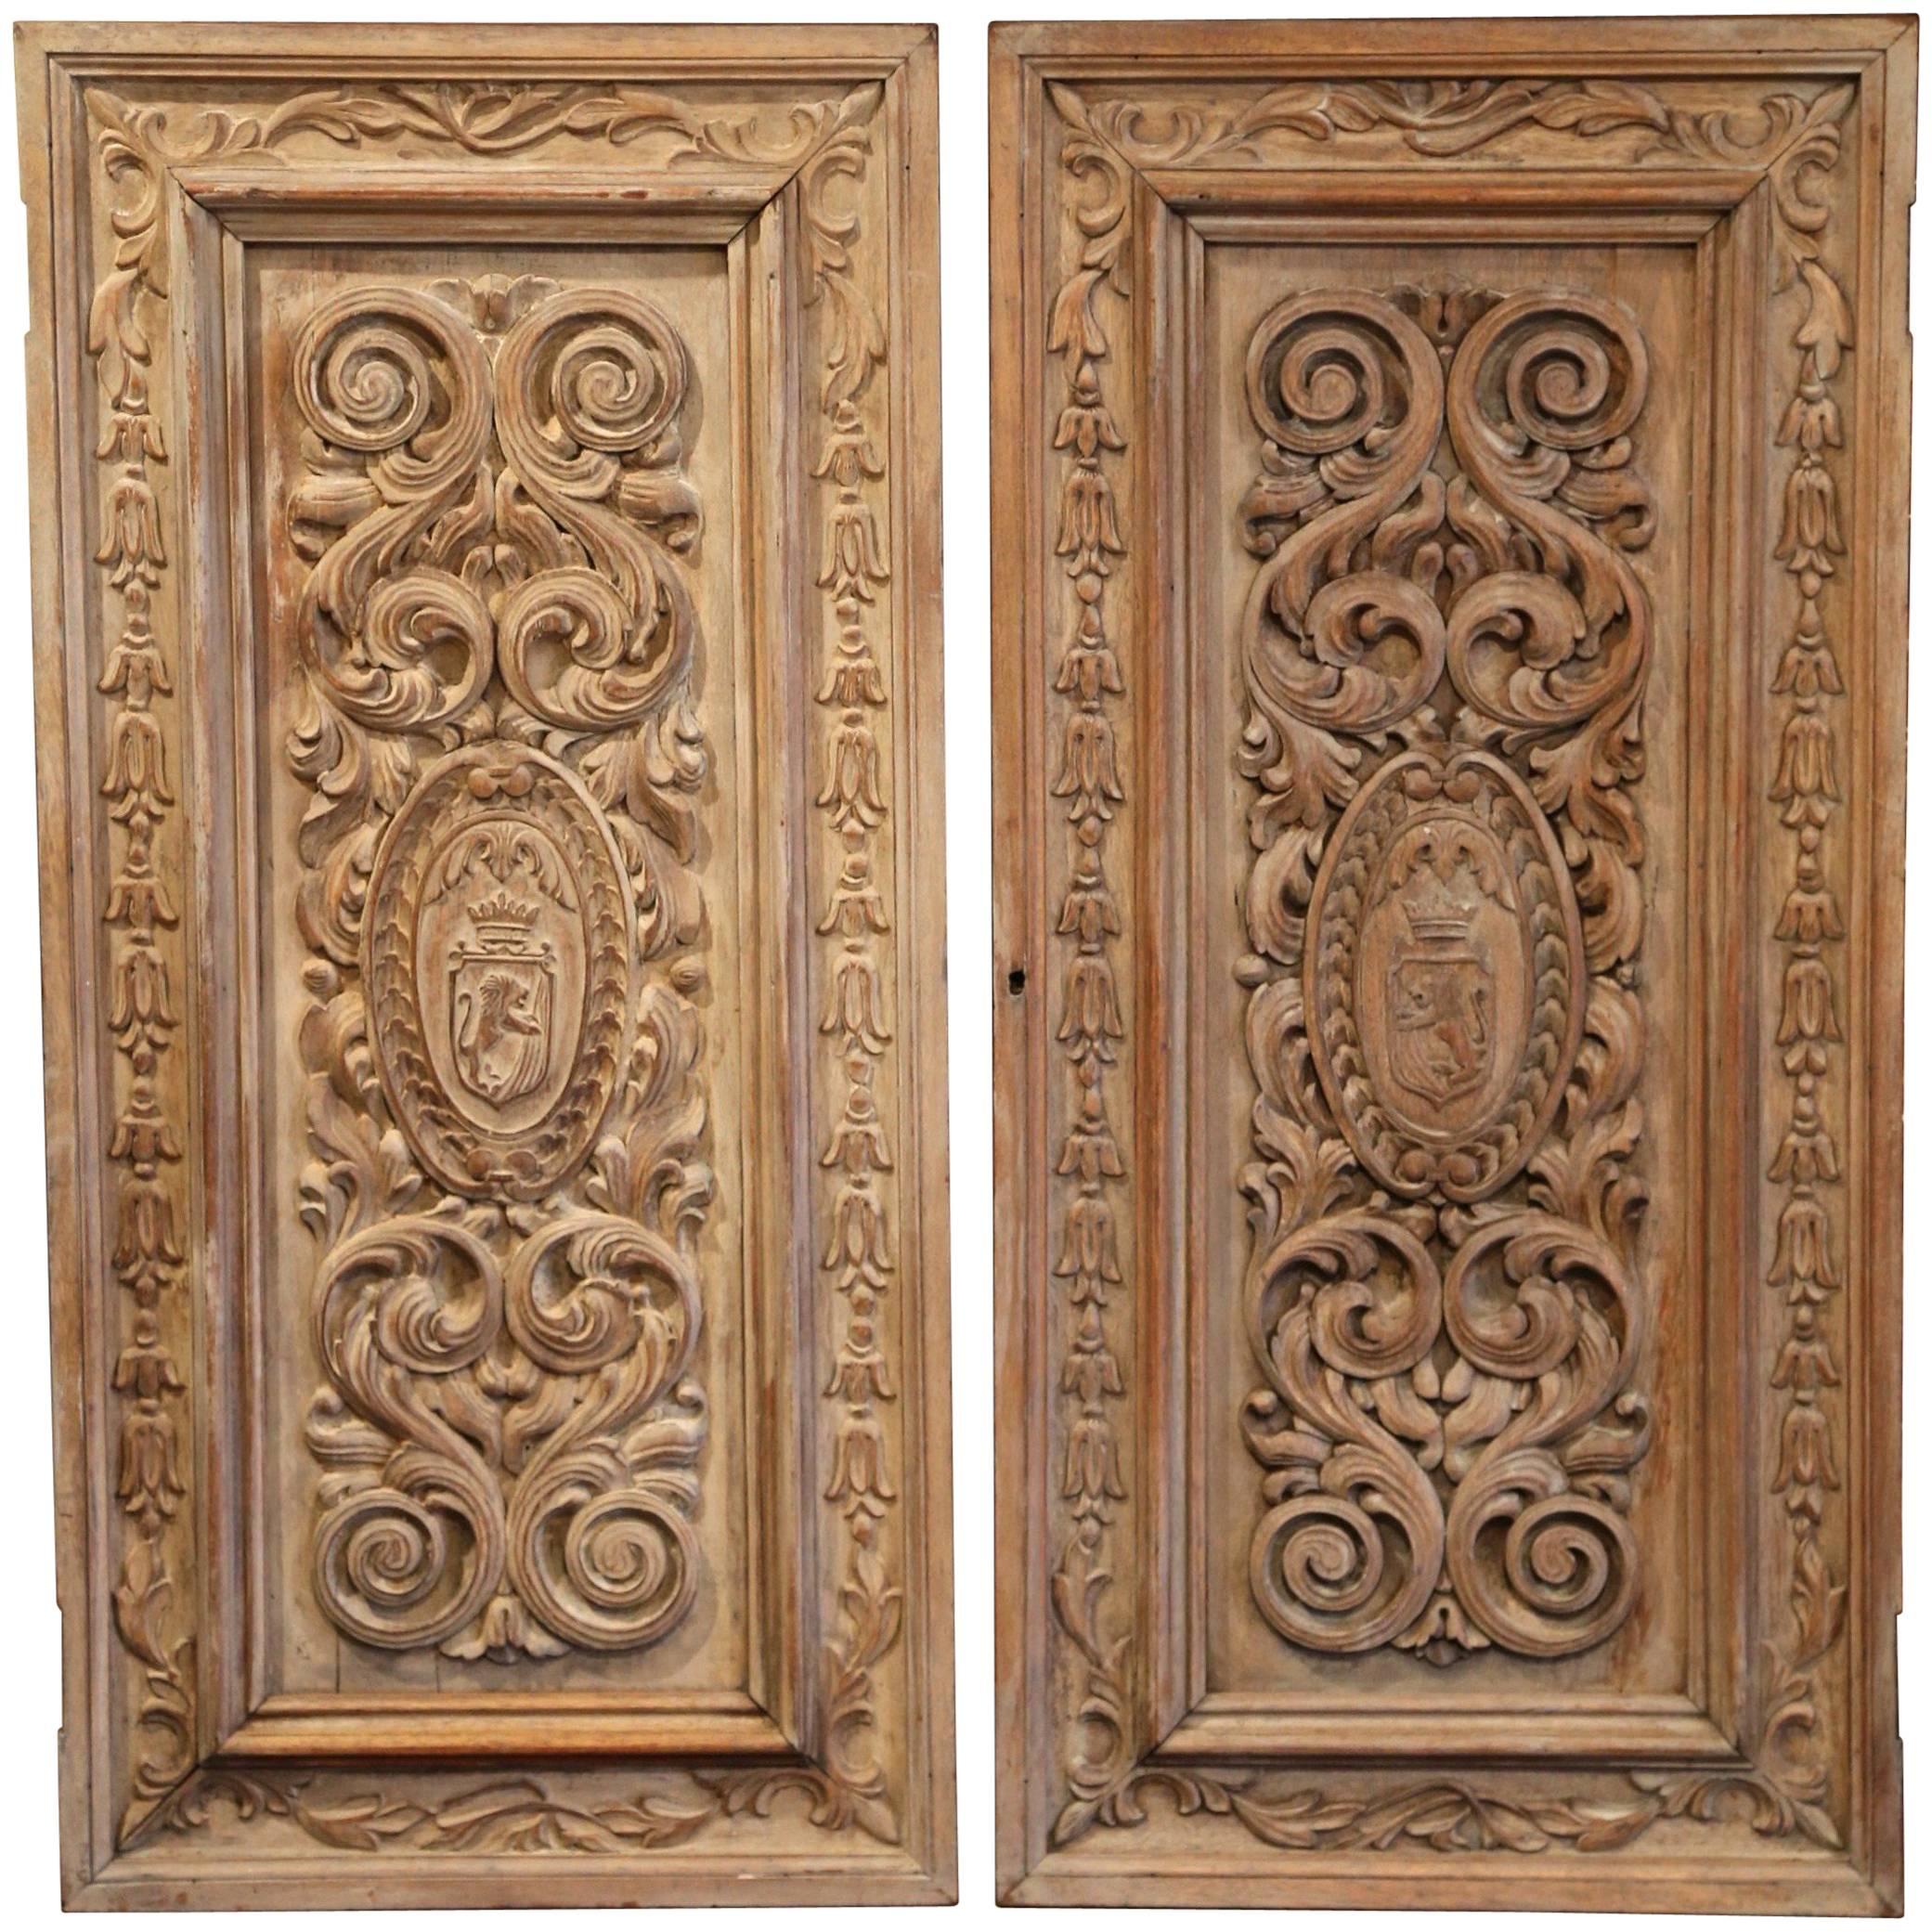 Pair of 19th Century French Hand-Carved Walnut Panel Doors with Family Crests